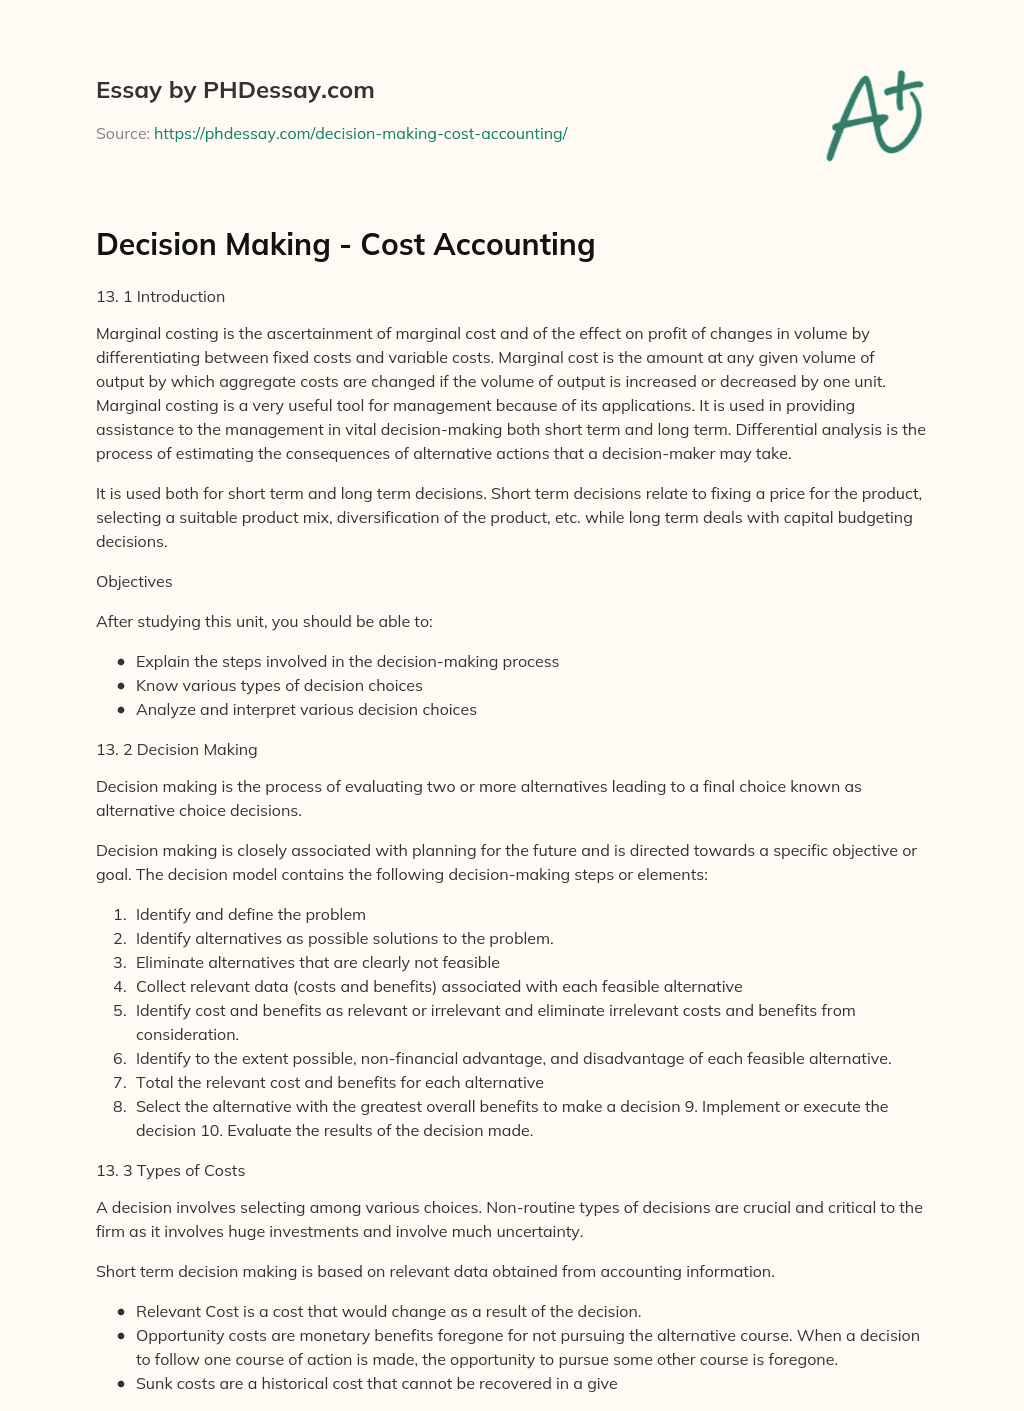 Decision Making – Cost Accounting essay